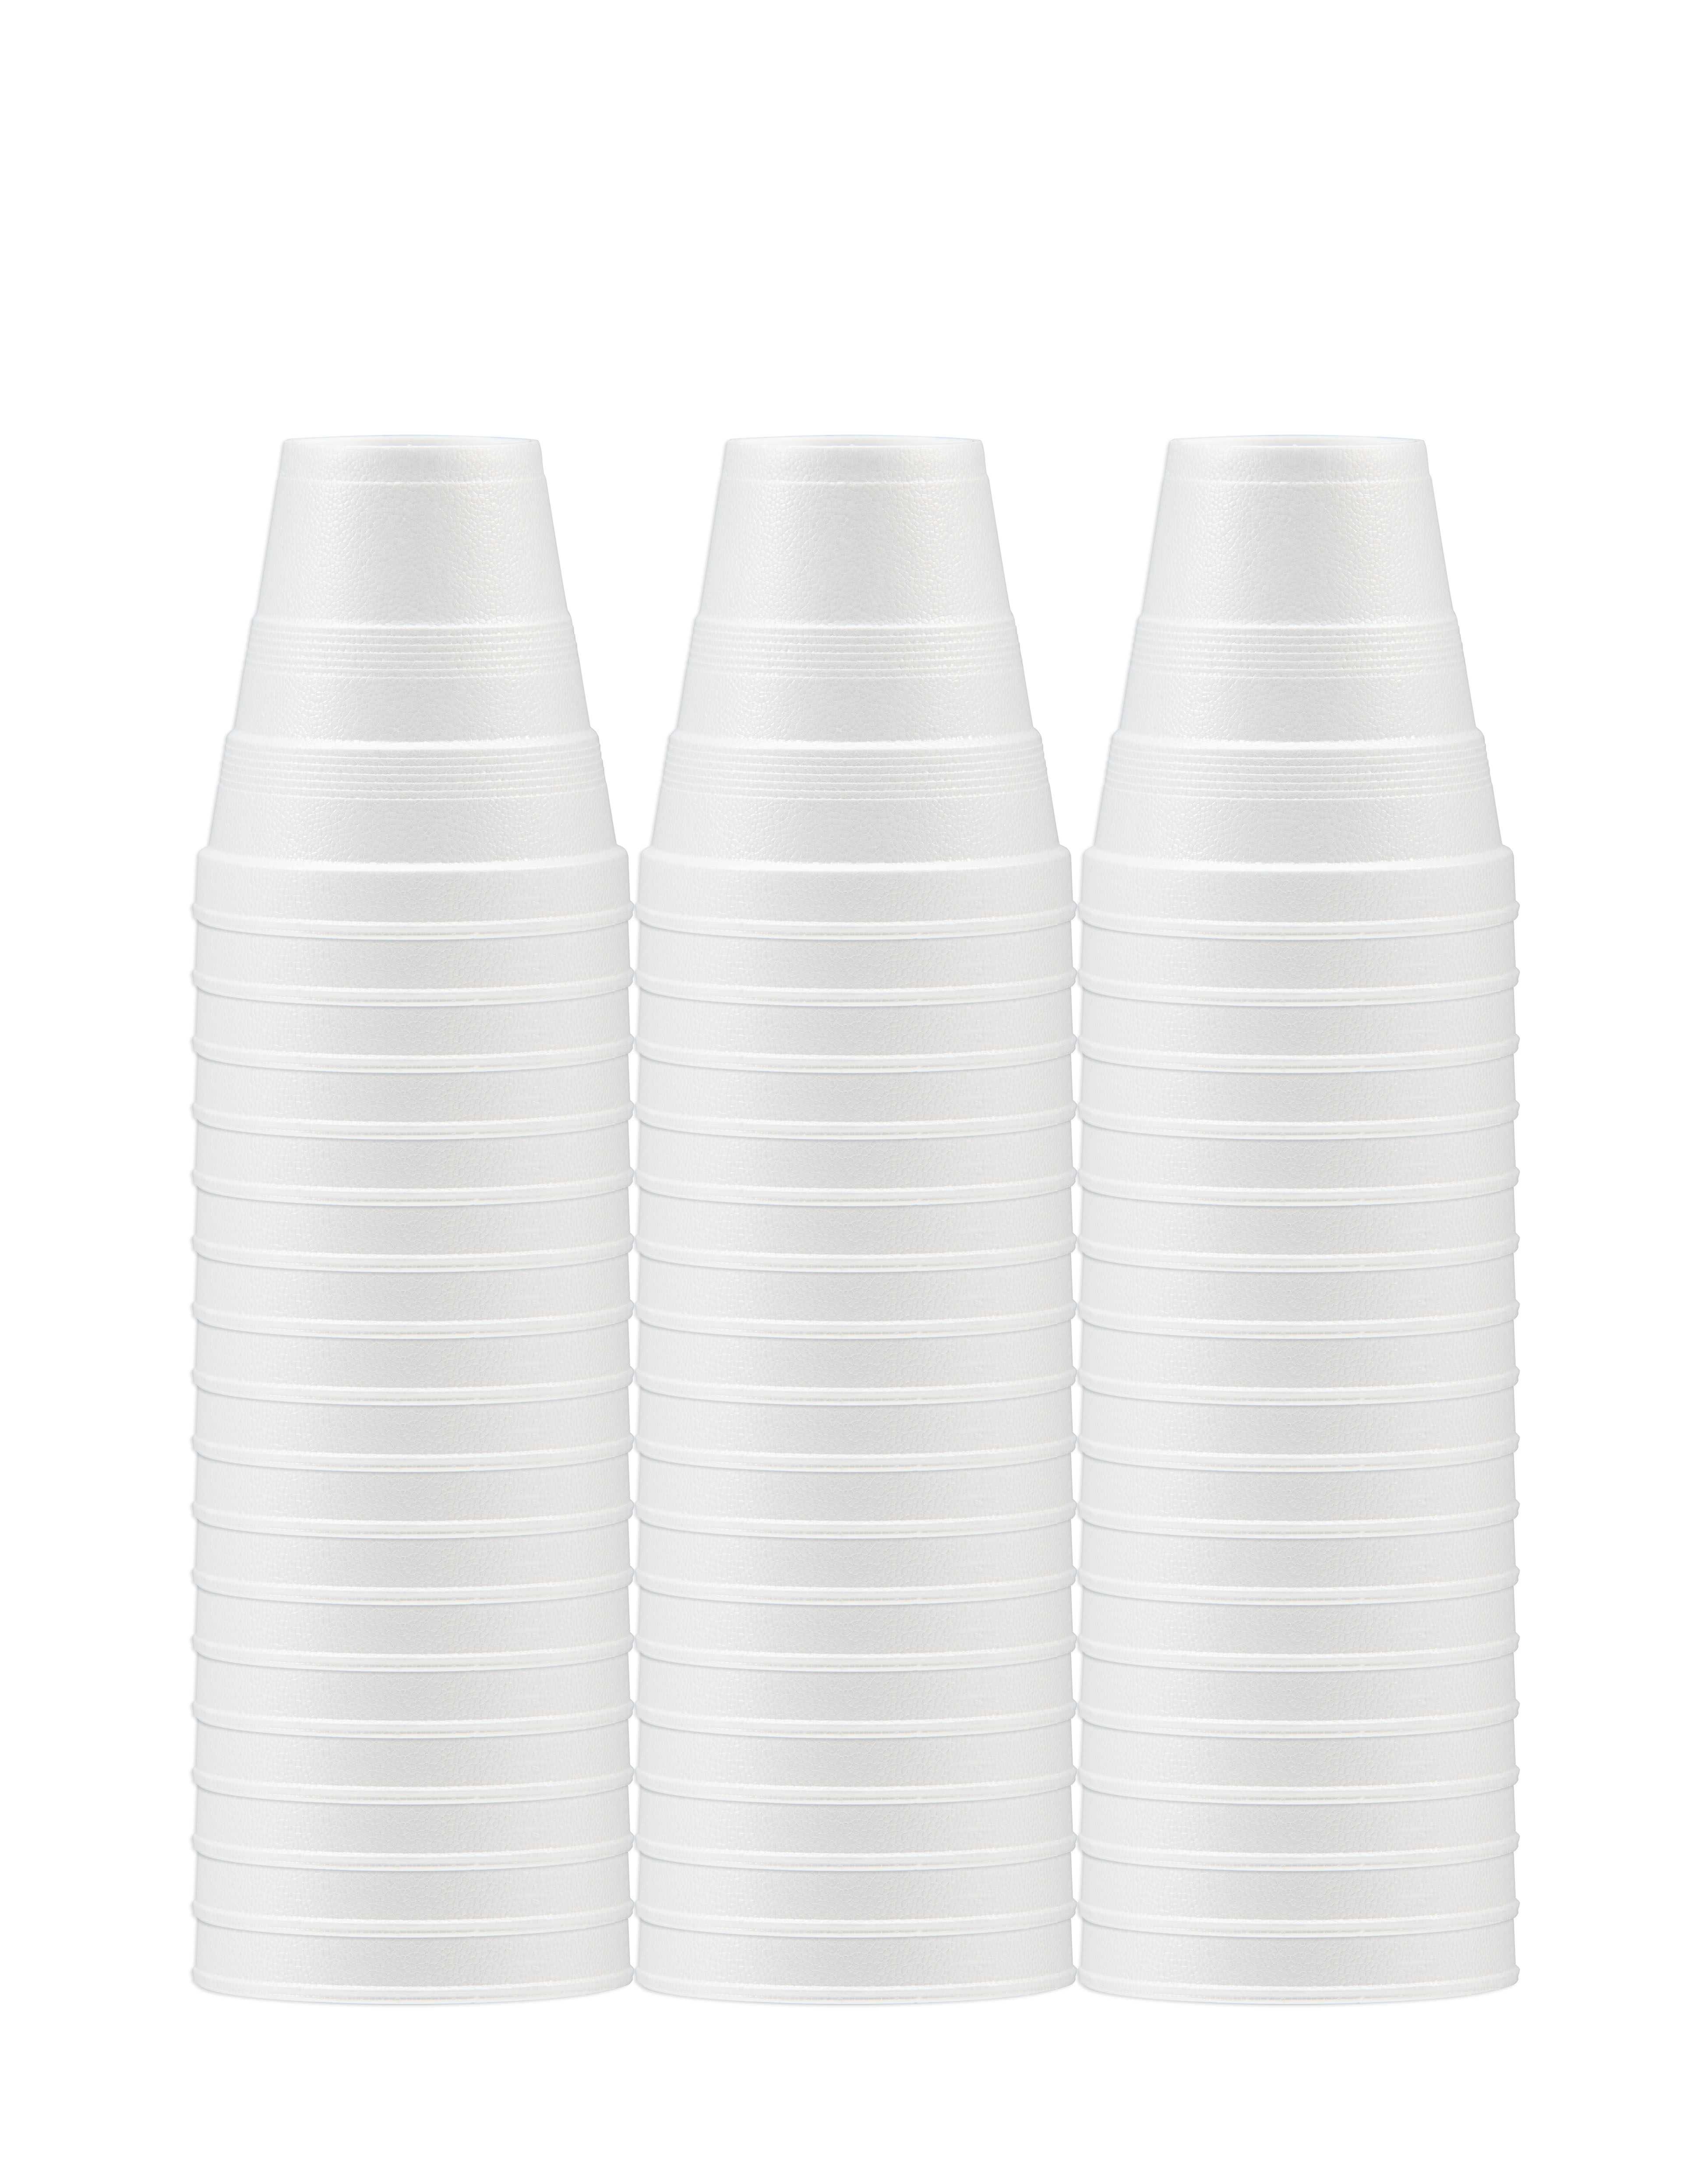 Great Value Disposable Foam Cups, 8 Ounce, 50 Count - image 4 of 8